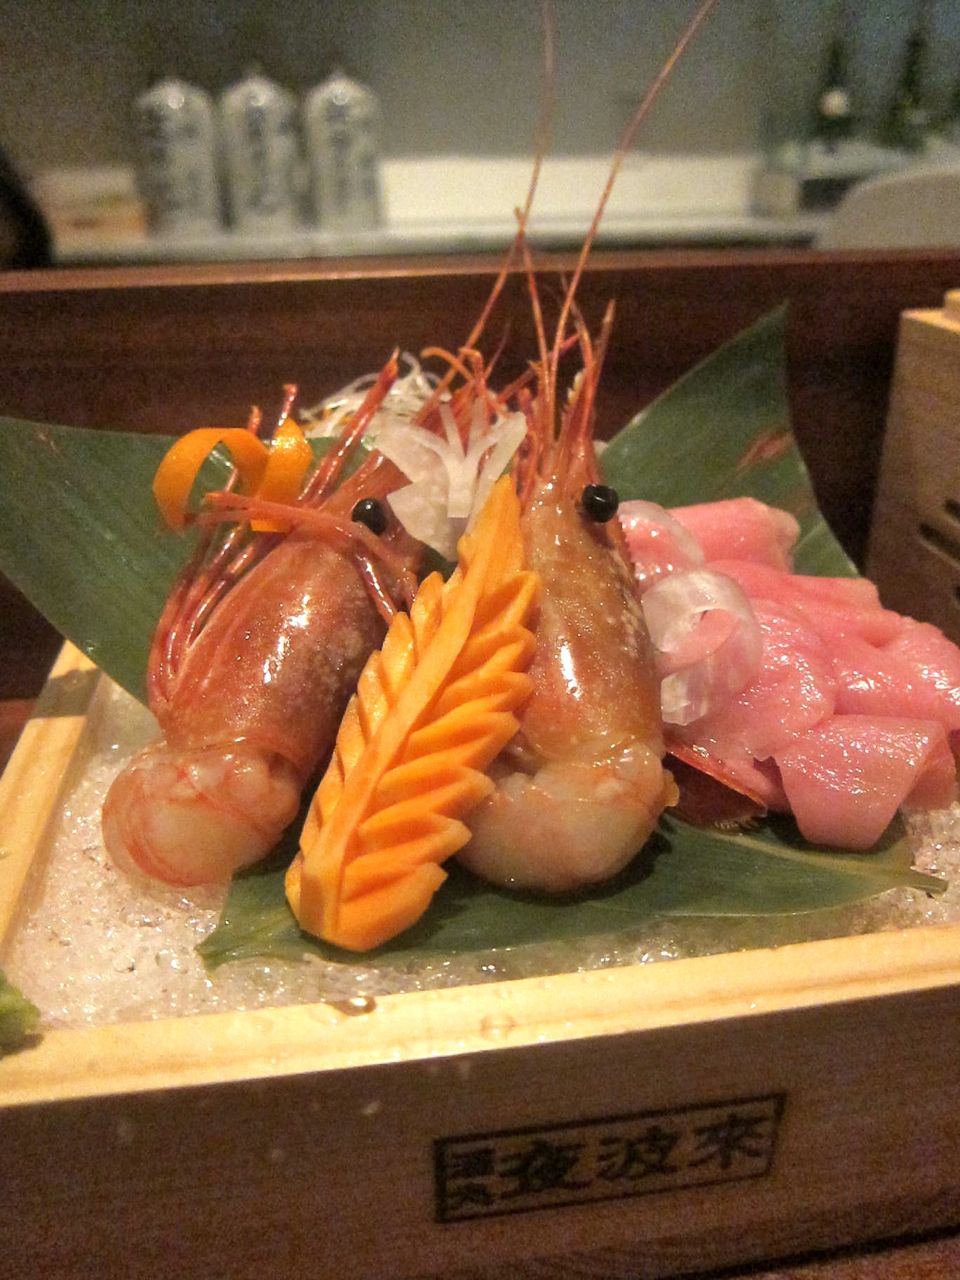 Texture thrills of otoro tuna and raw prawns followed by crunch of grilled heads